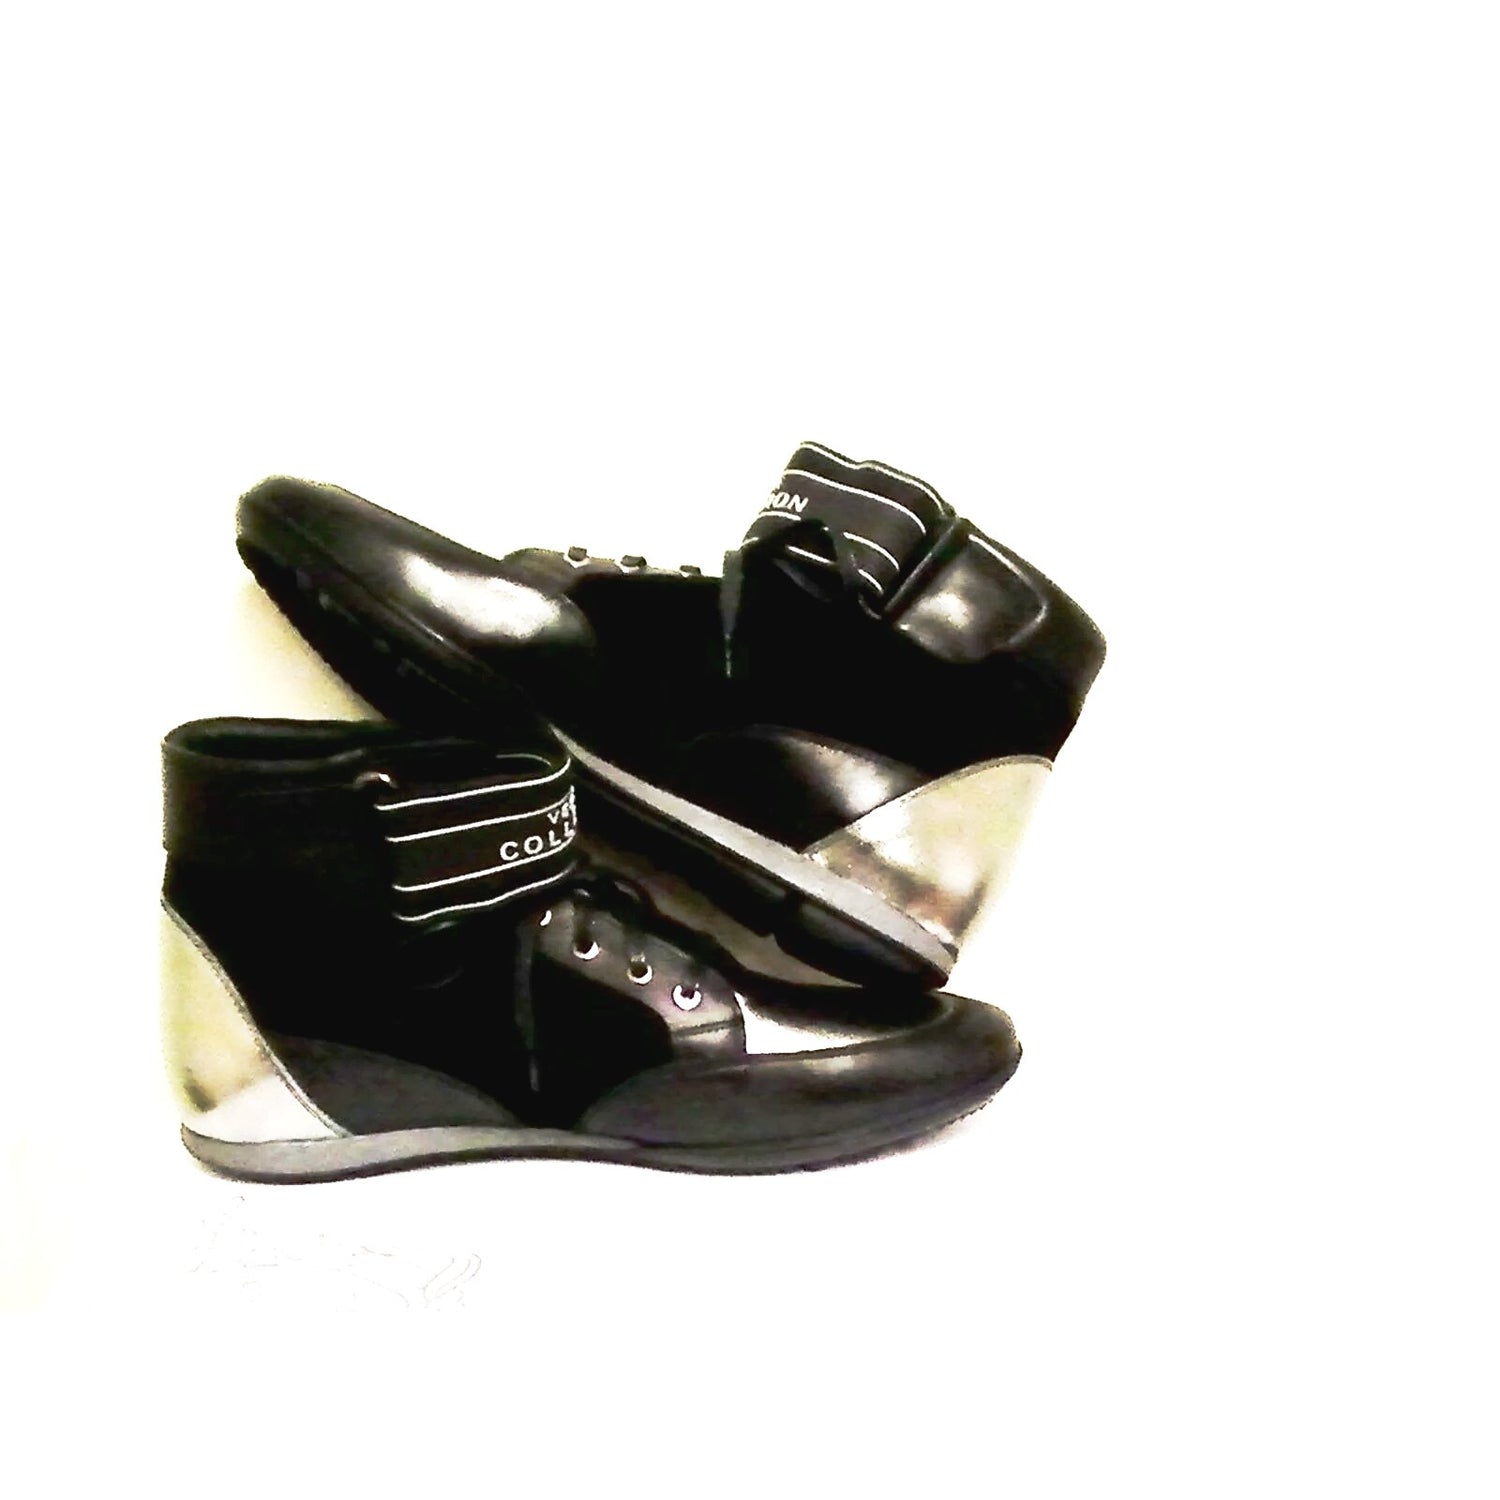 Versace mens shoes collection casual High size 39 euro new with box